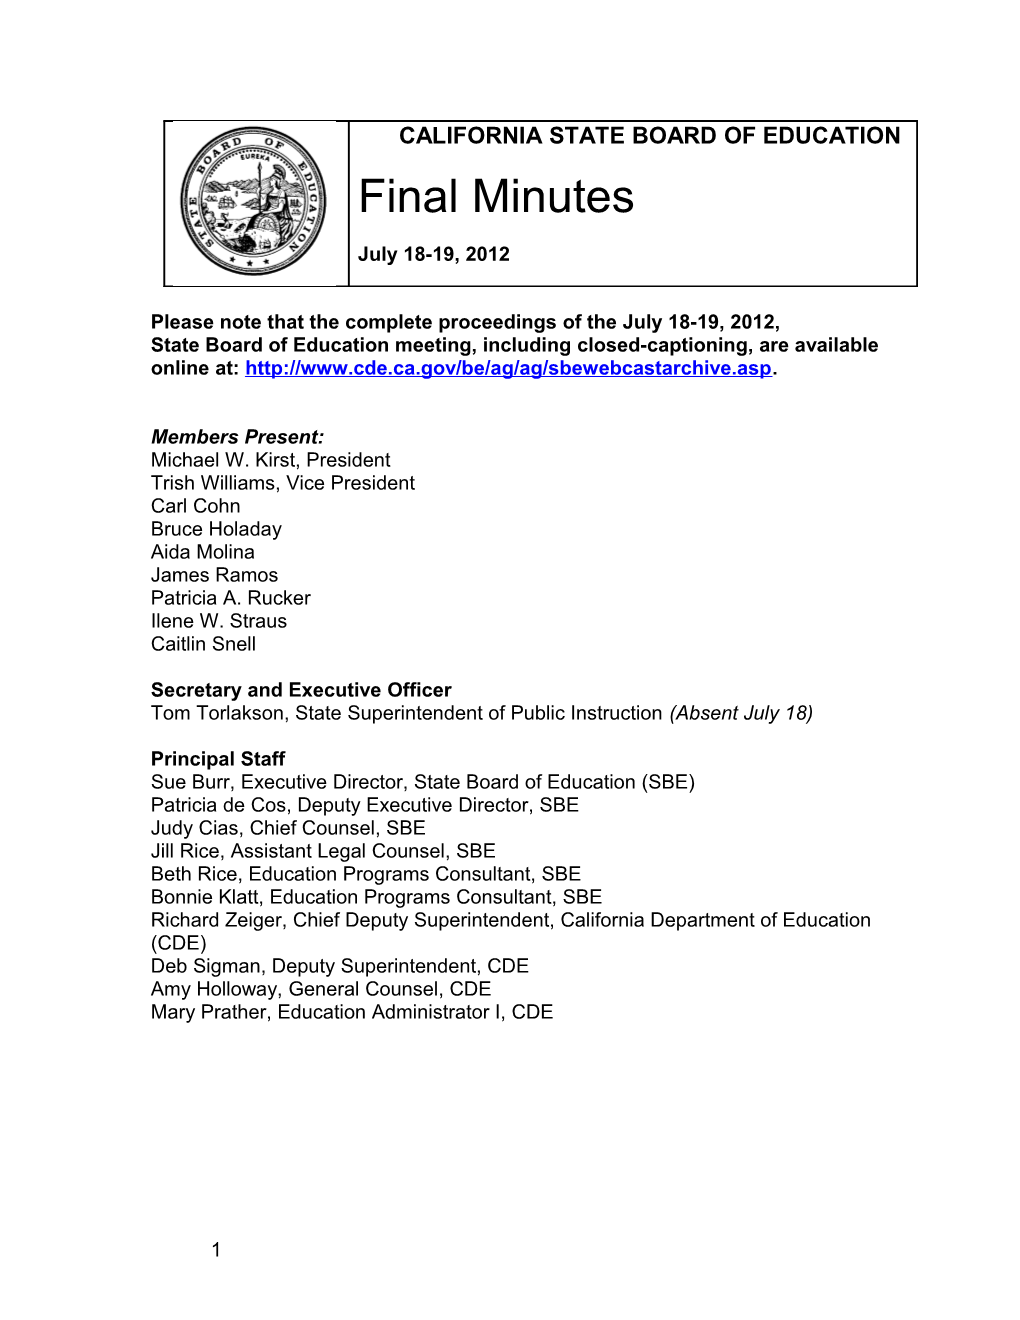 Final Minutes for July 18-19, 2012 - SBE Minutes (CA State Board of Education)